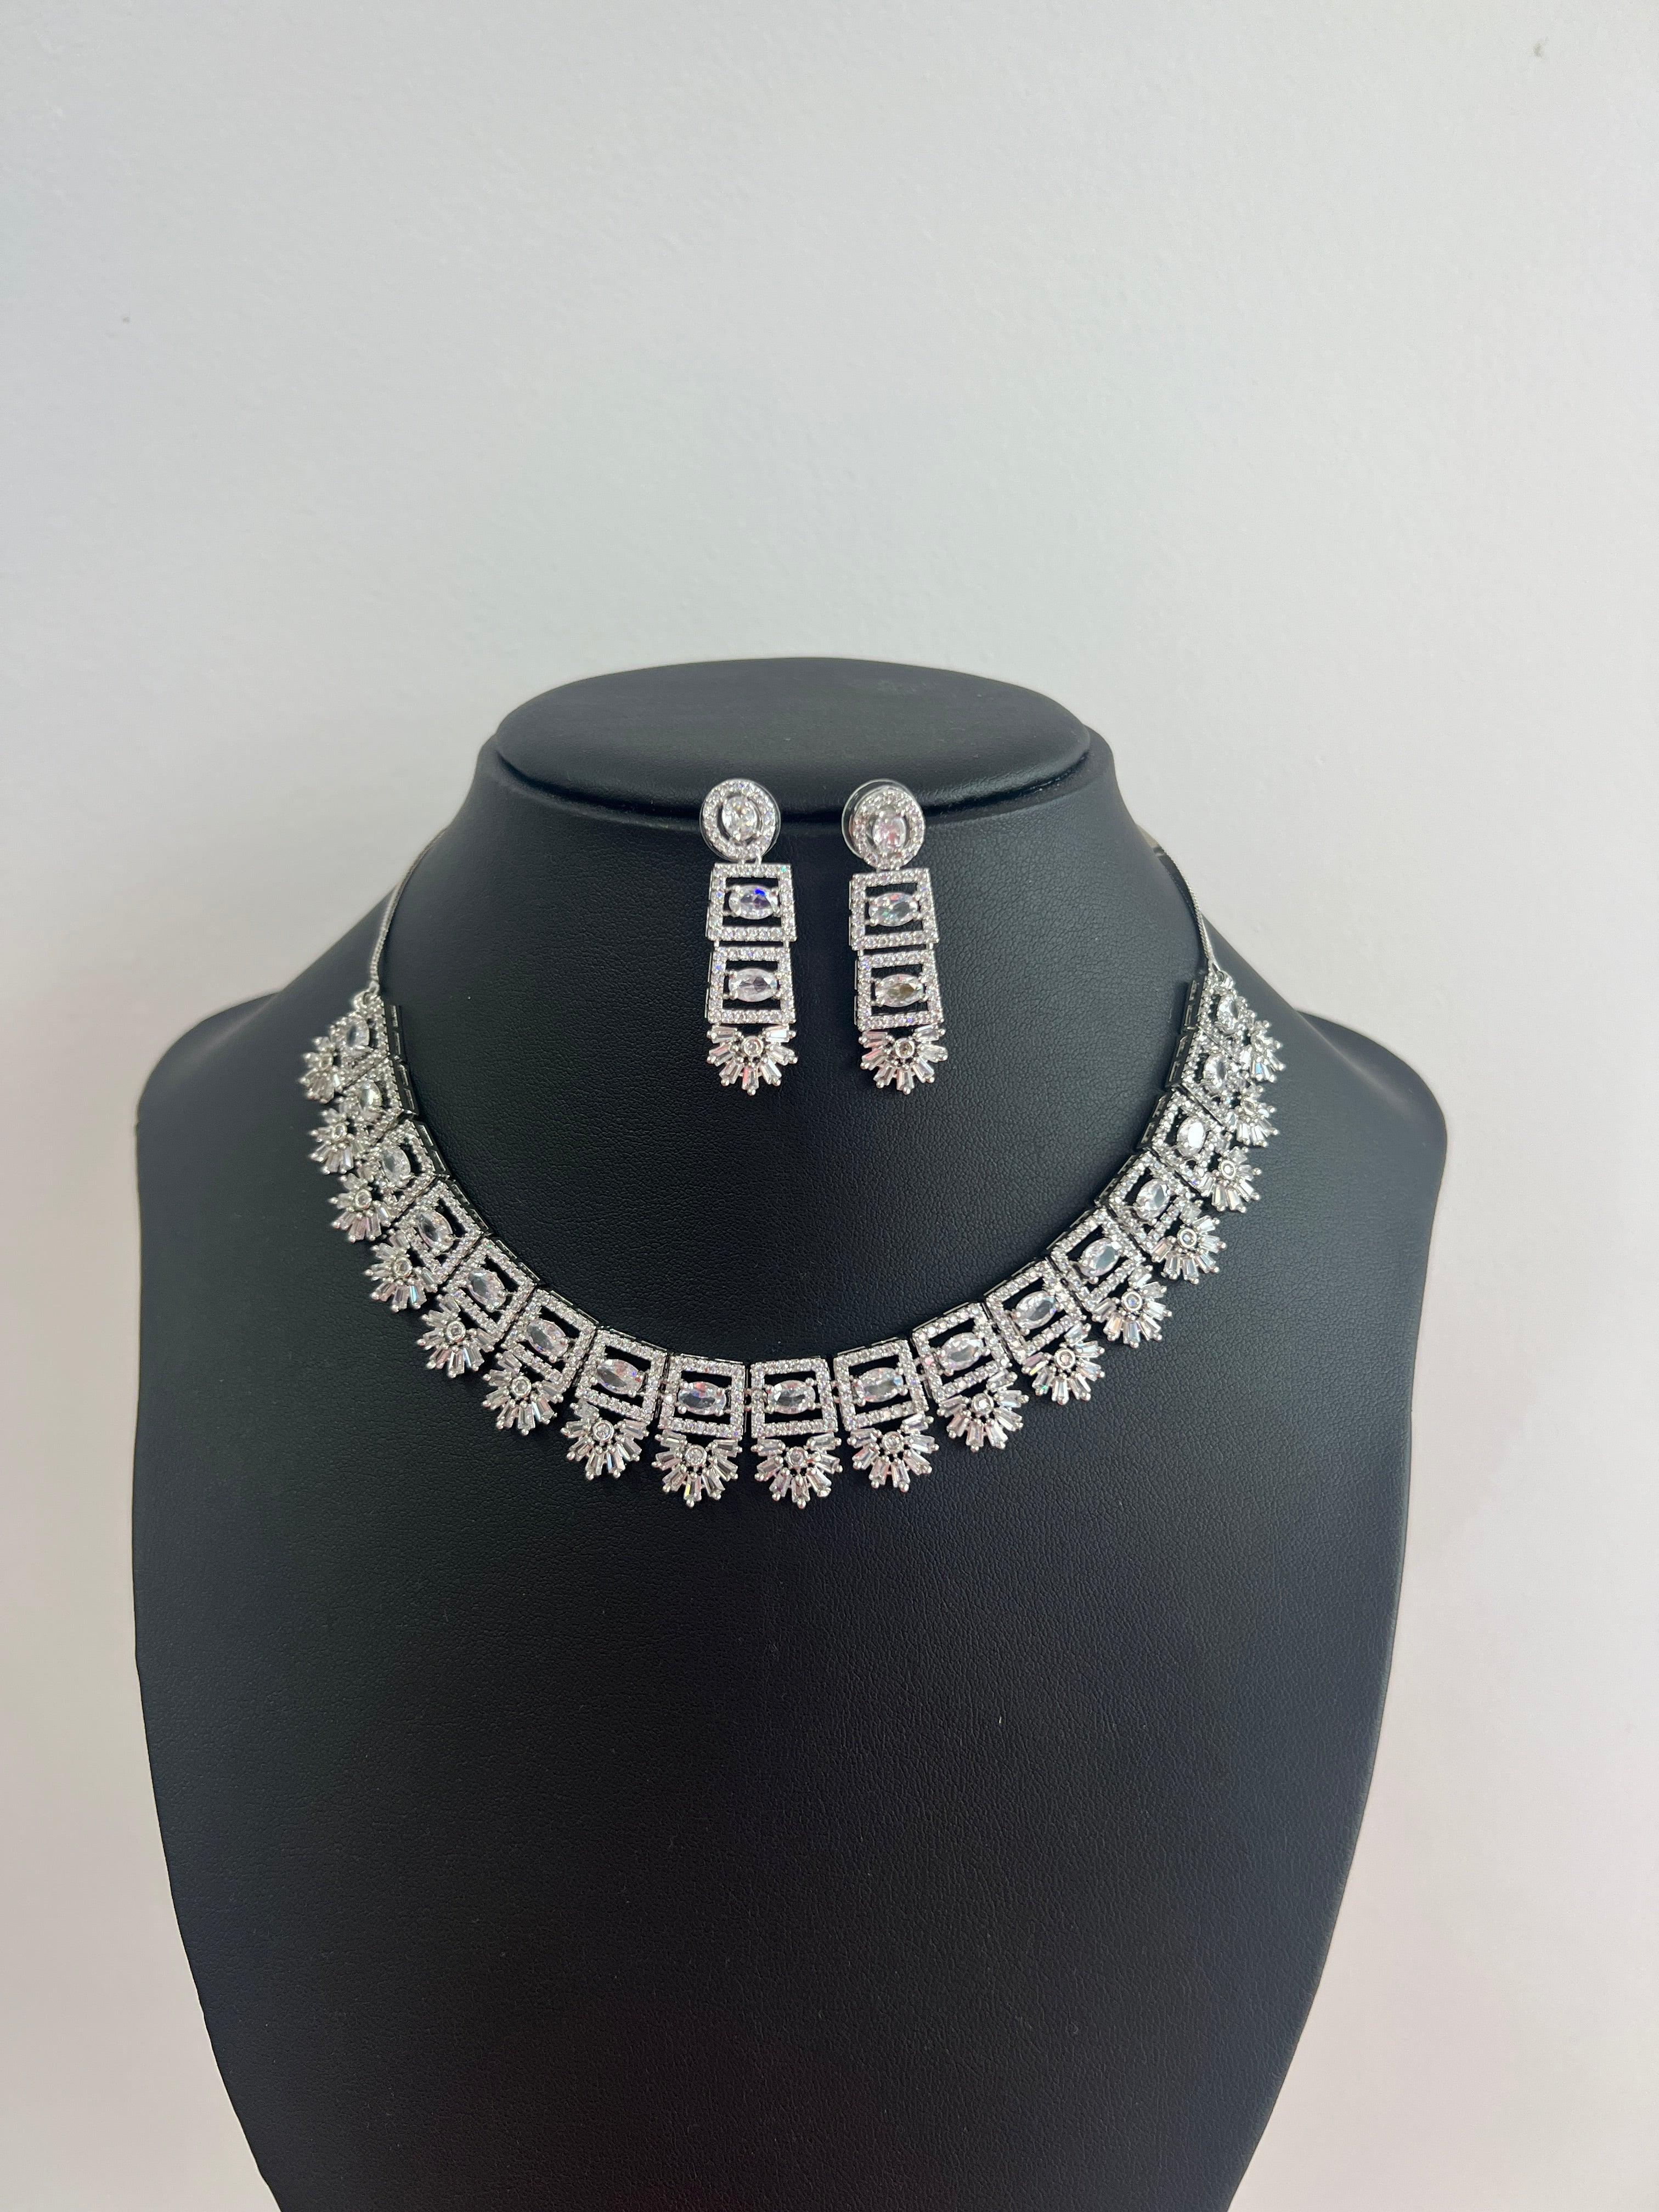 American Diamond Necklace Set with Crystal Stone - Boutique Nepal Australia 